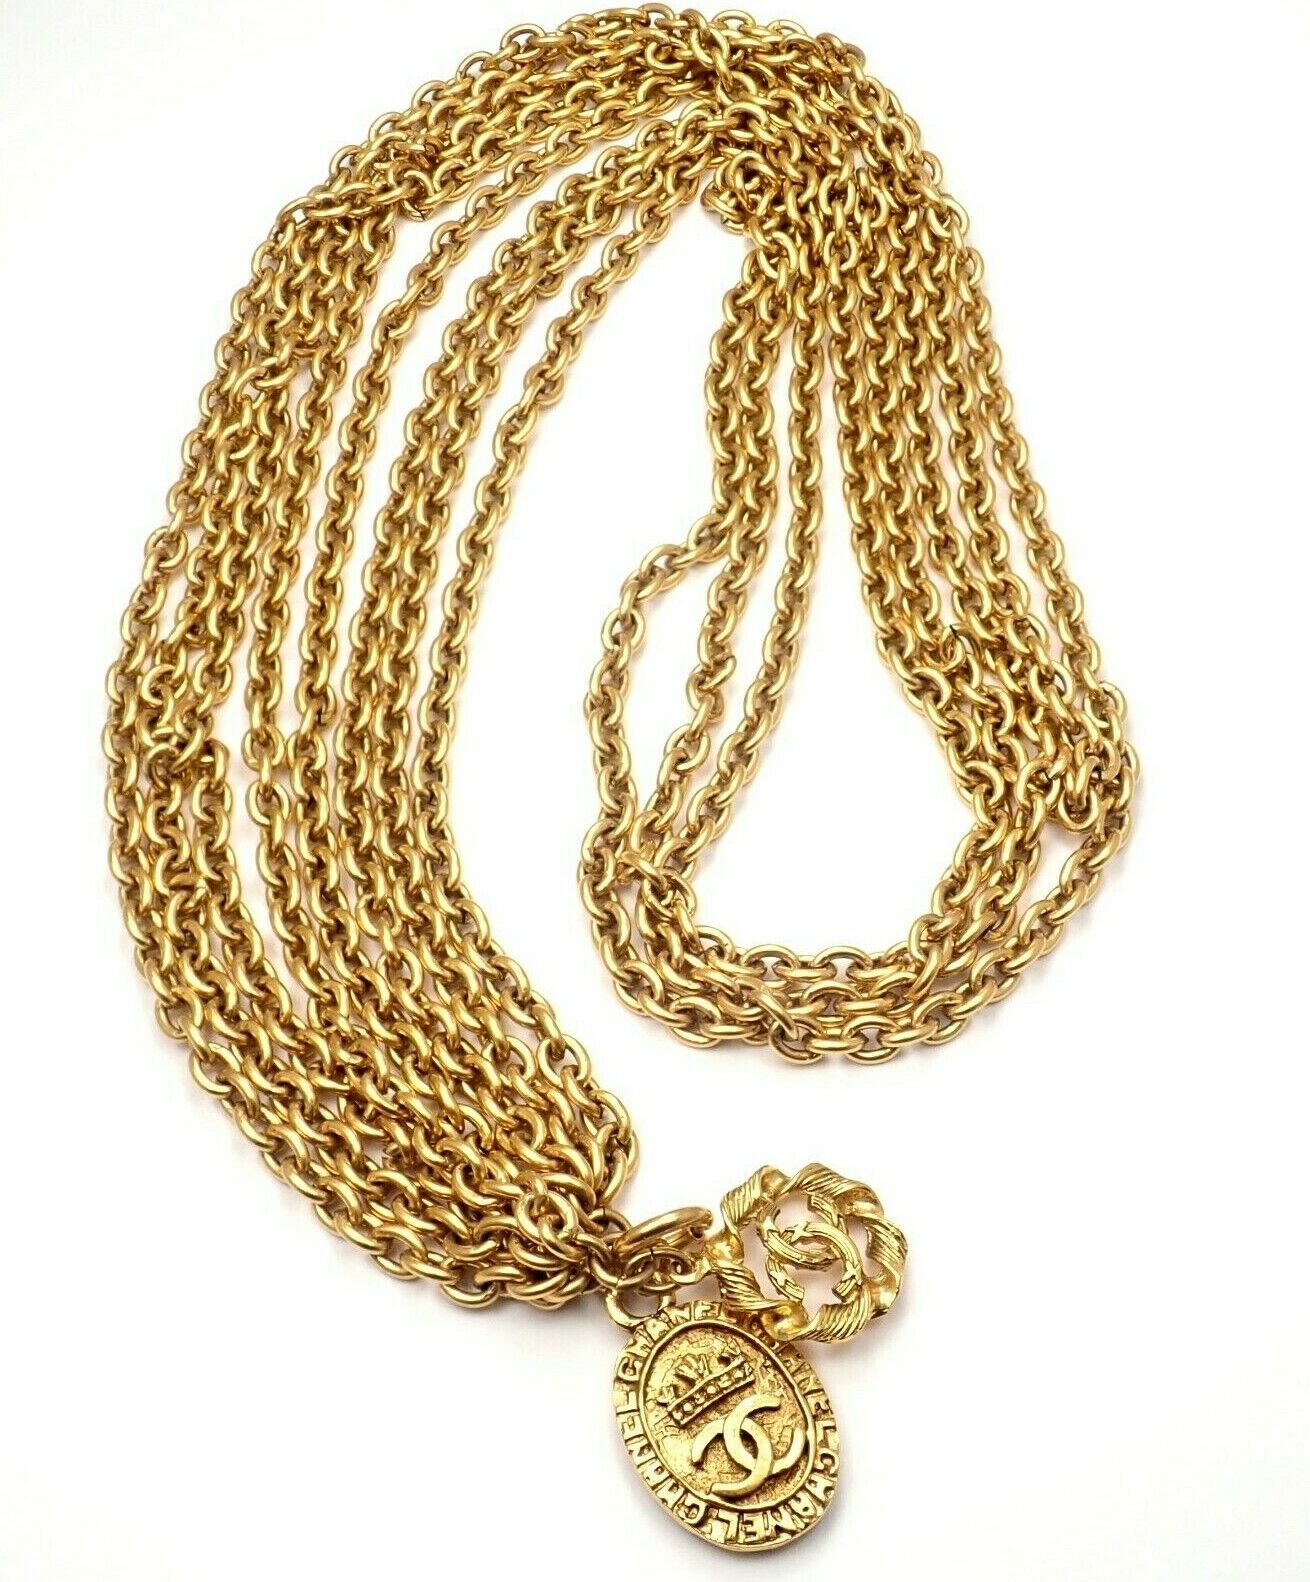 Amazing Authentic Chanel Gold Tone 3 Row Draped Clasp Belt Necklace 34